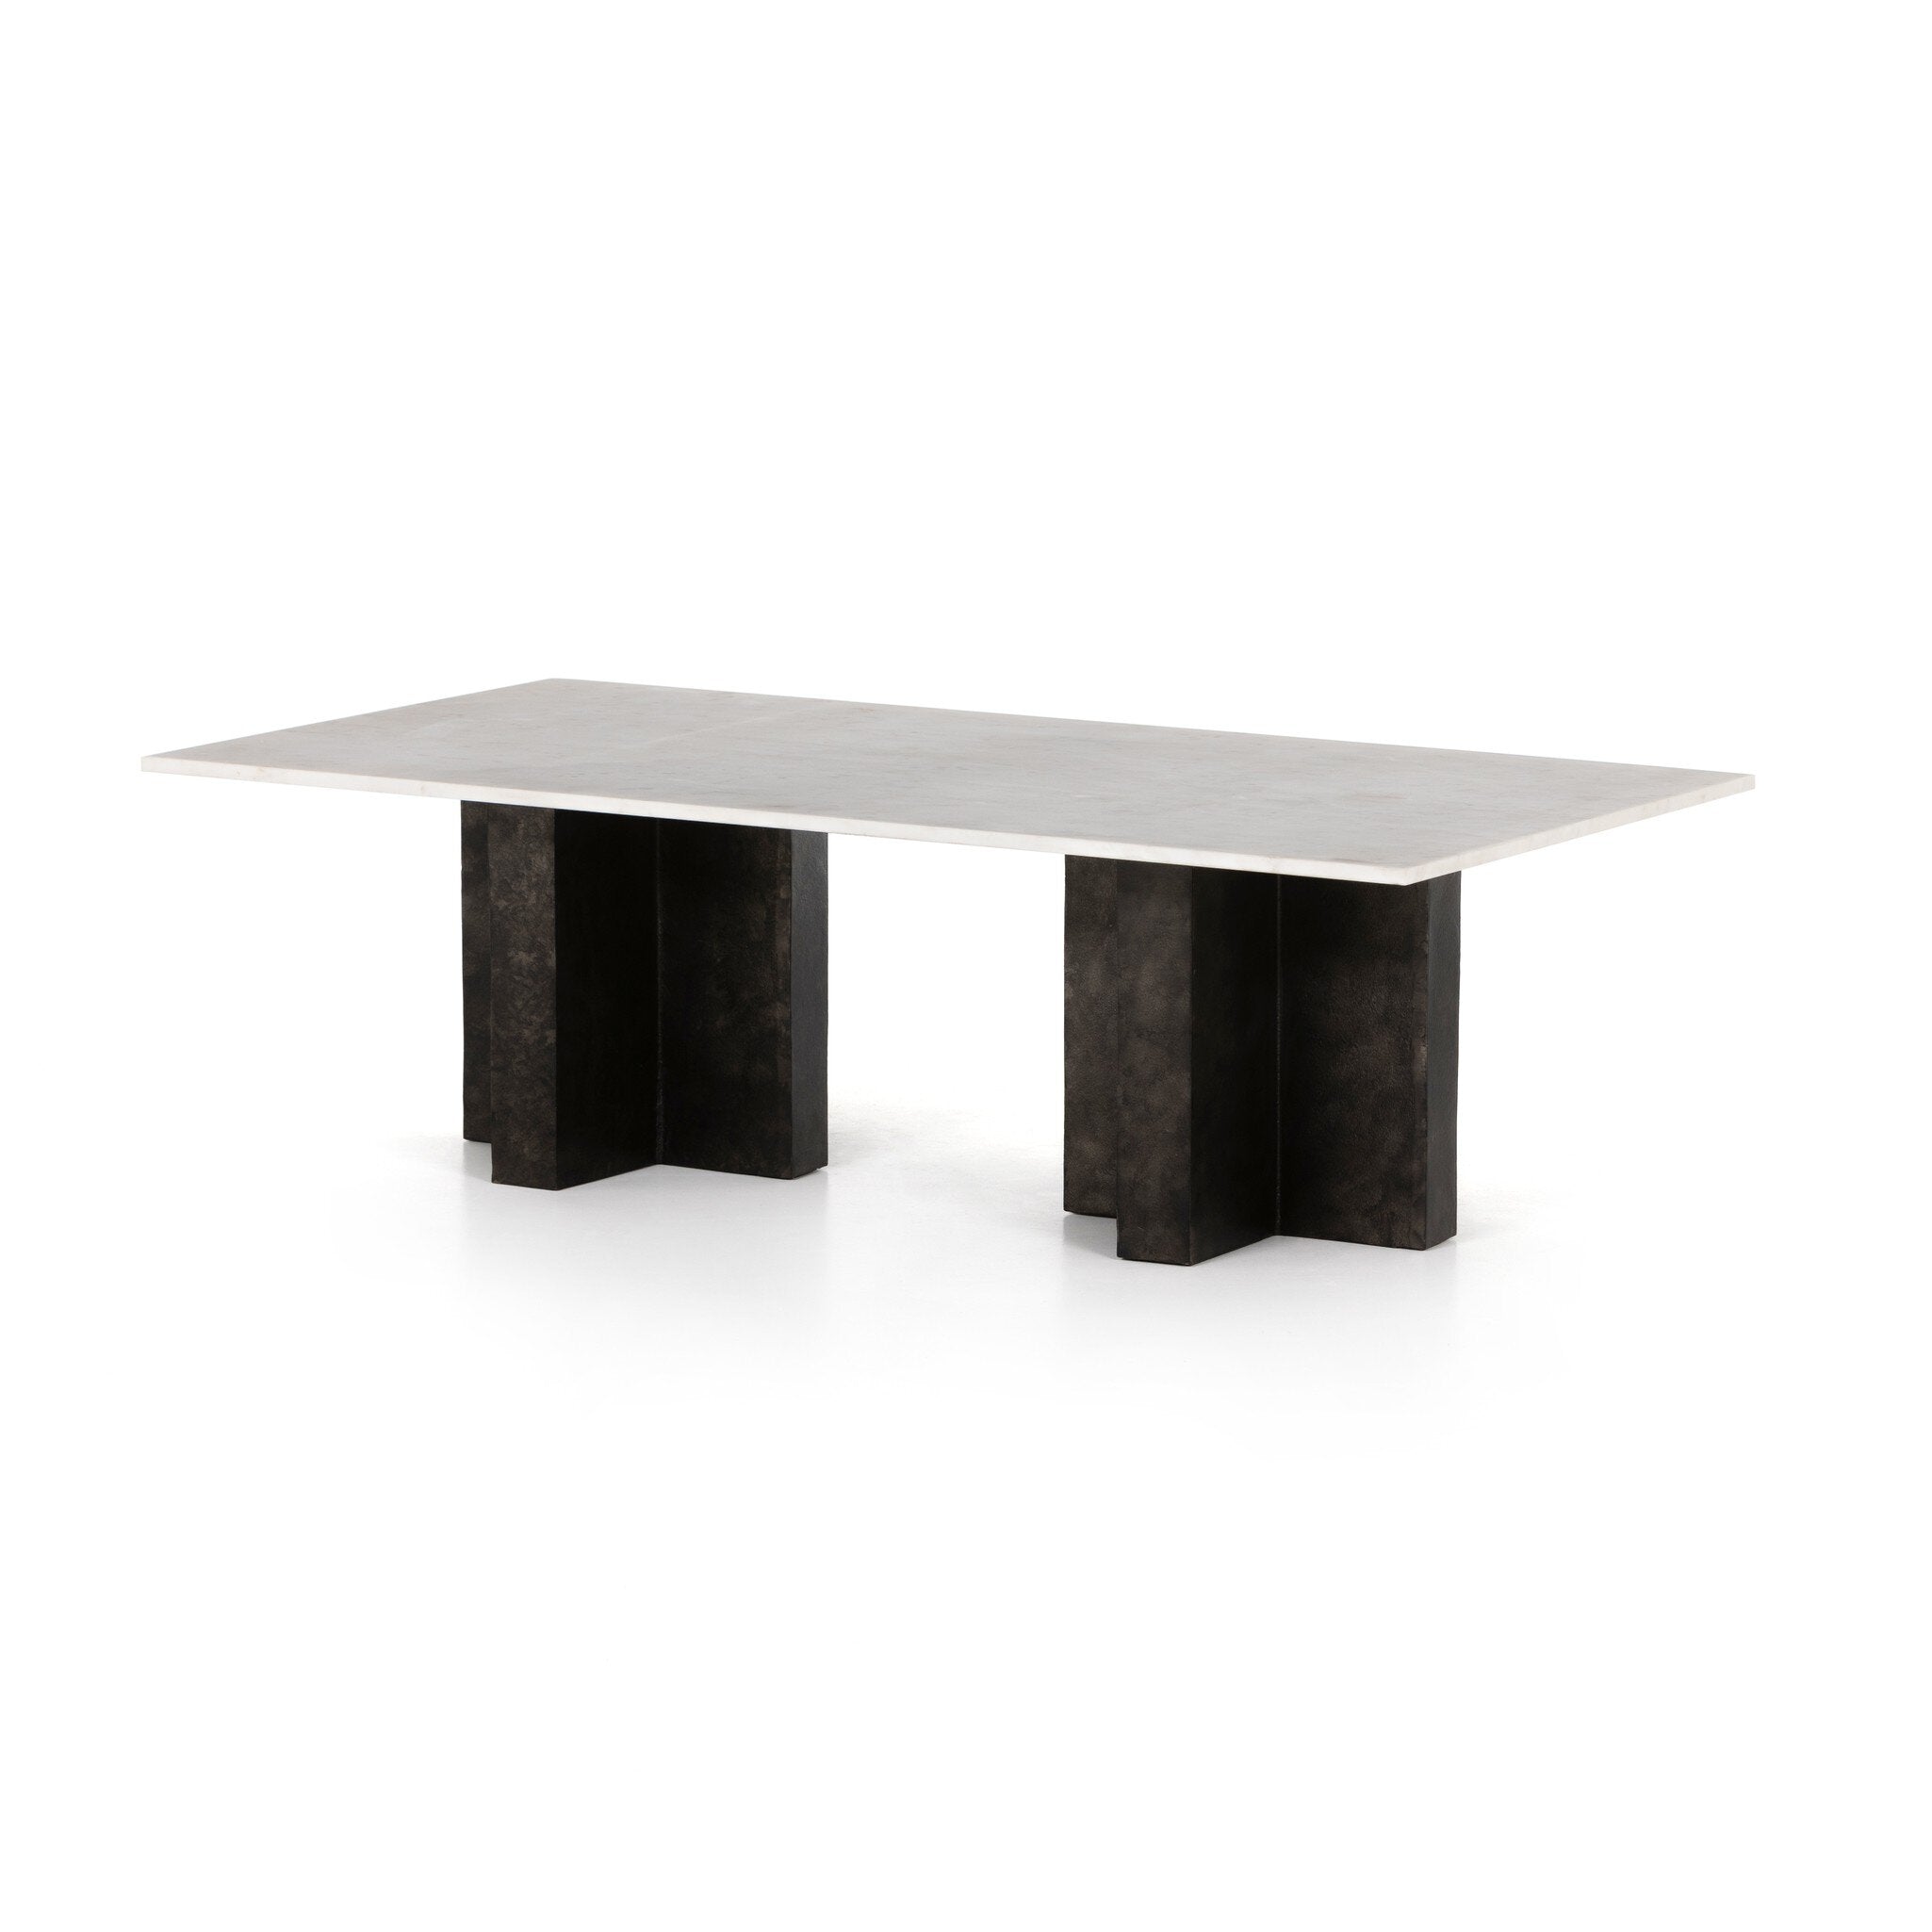 Terrell Coffee Table - Polished White Marble